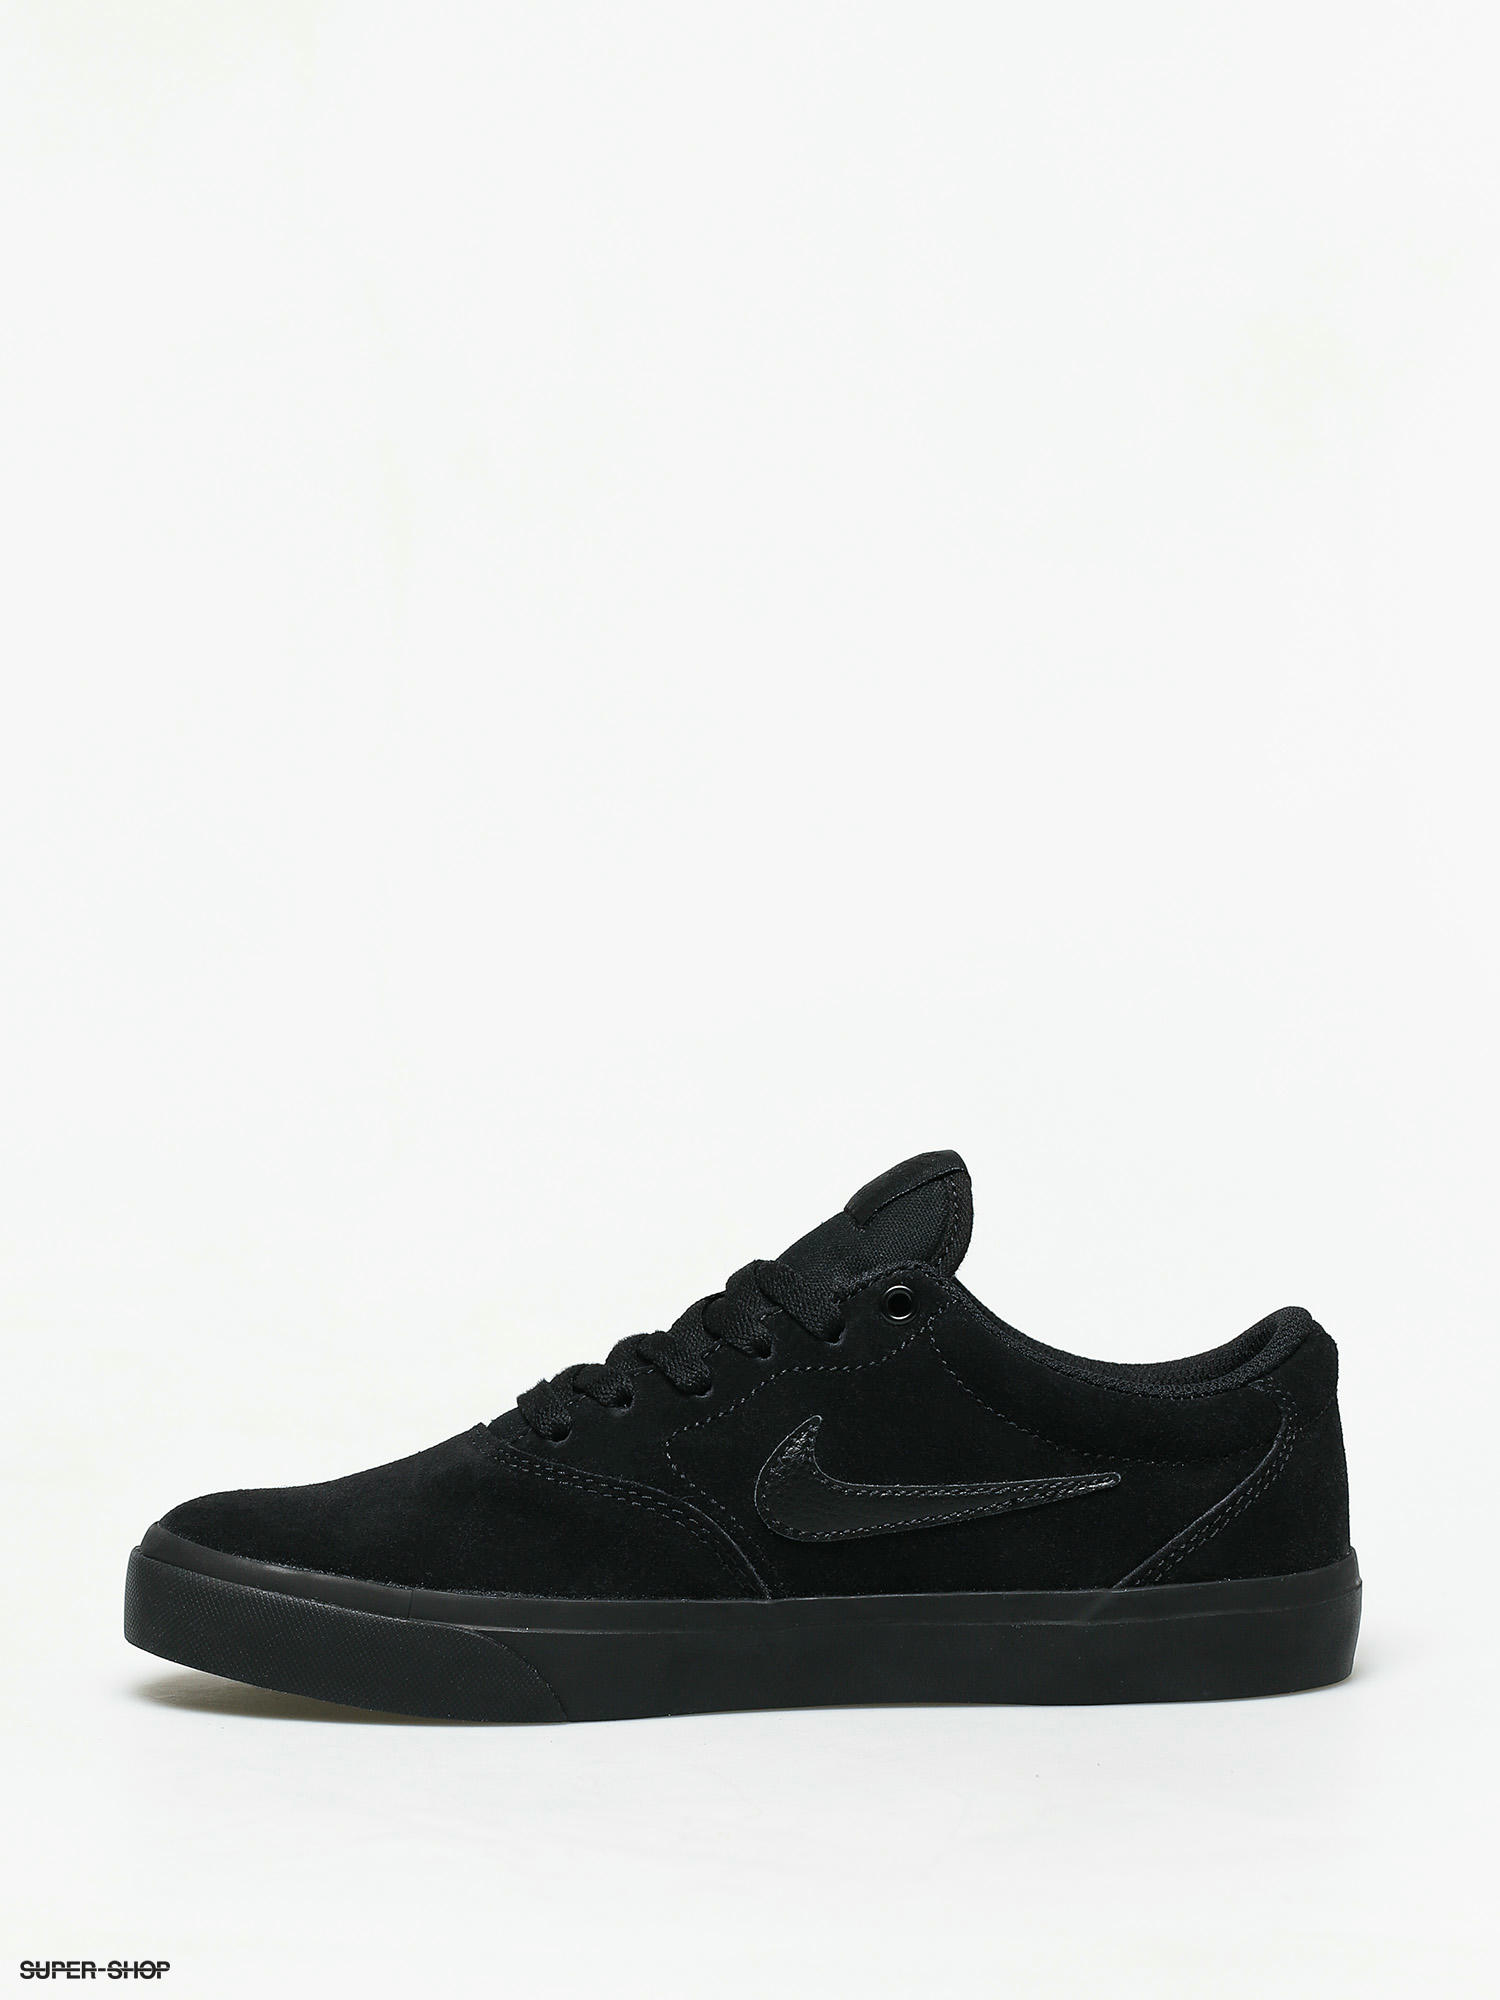 nike sb charge suede shoes